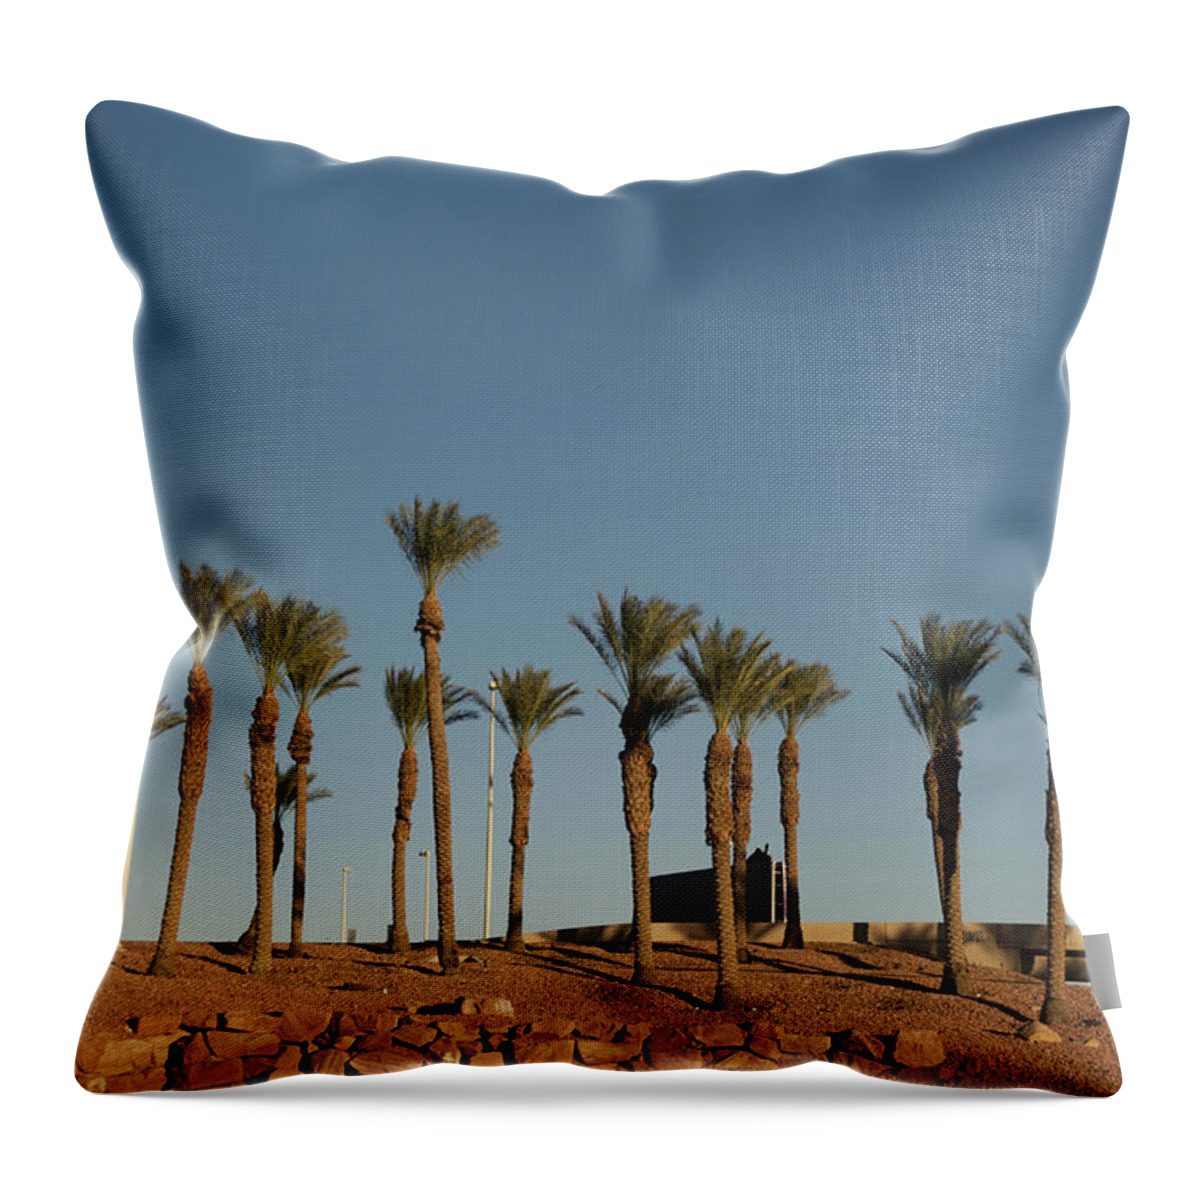 Tranquility Throw Pillow featuring the photograph Airport Palms by Aaron Mccoy